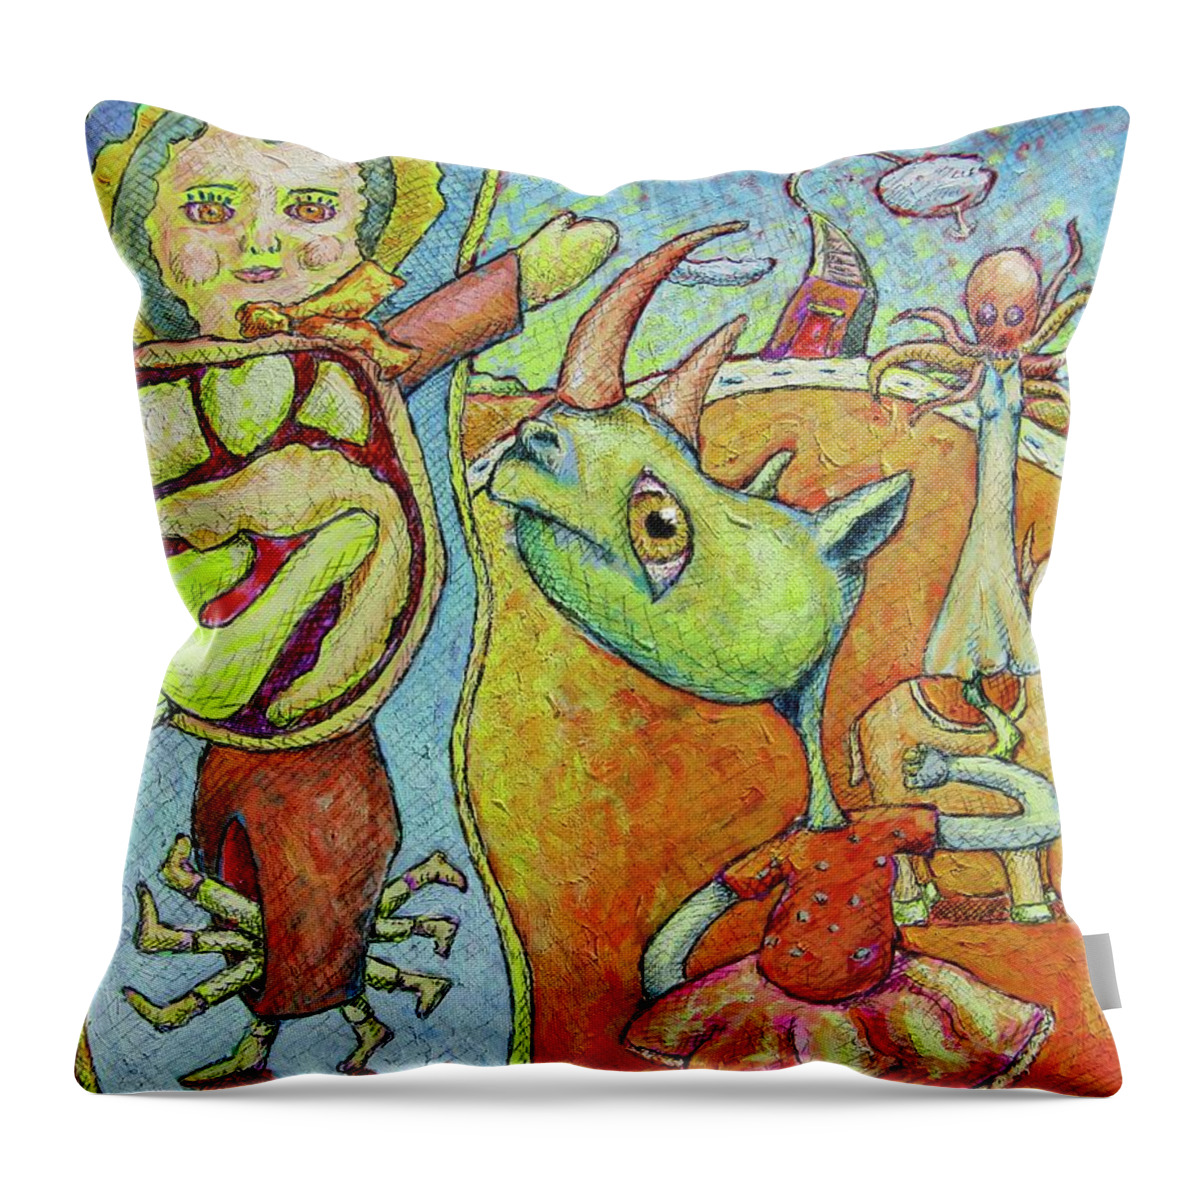 Legs Throw Pillow featuring the painting Embracing Diversity by Ronald Walker